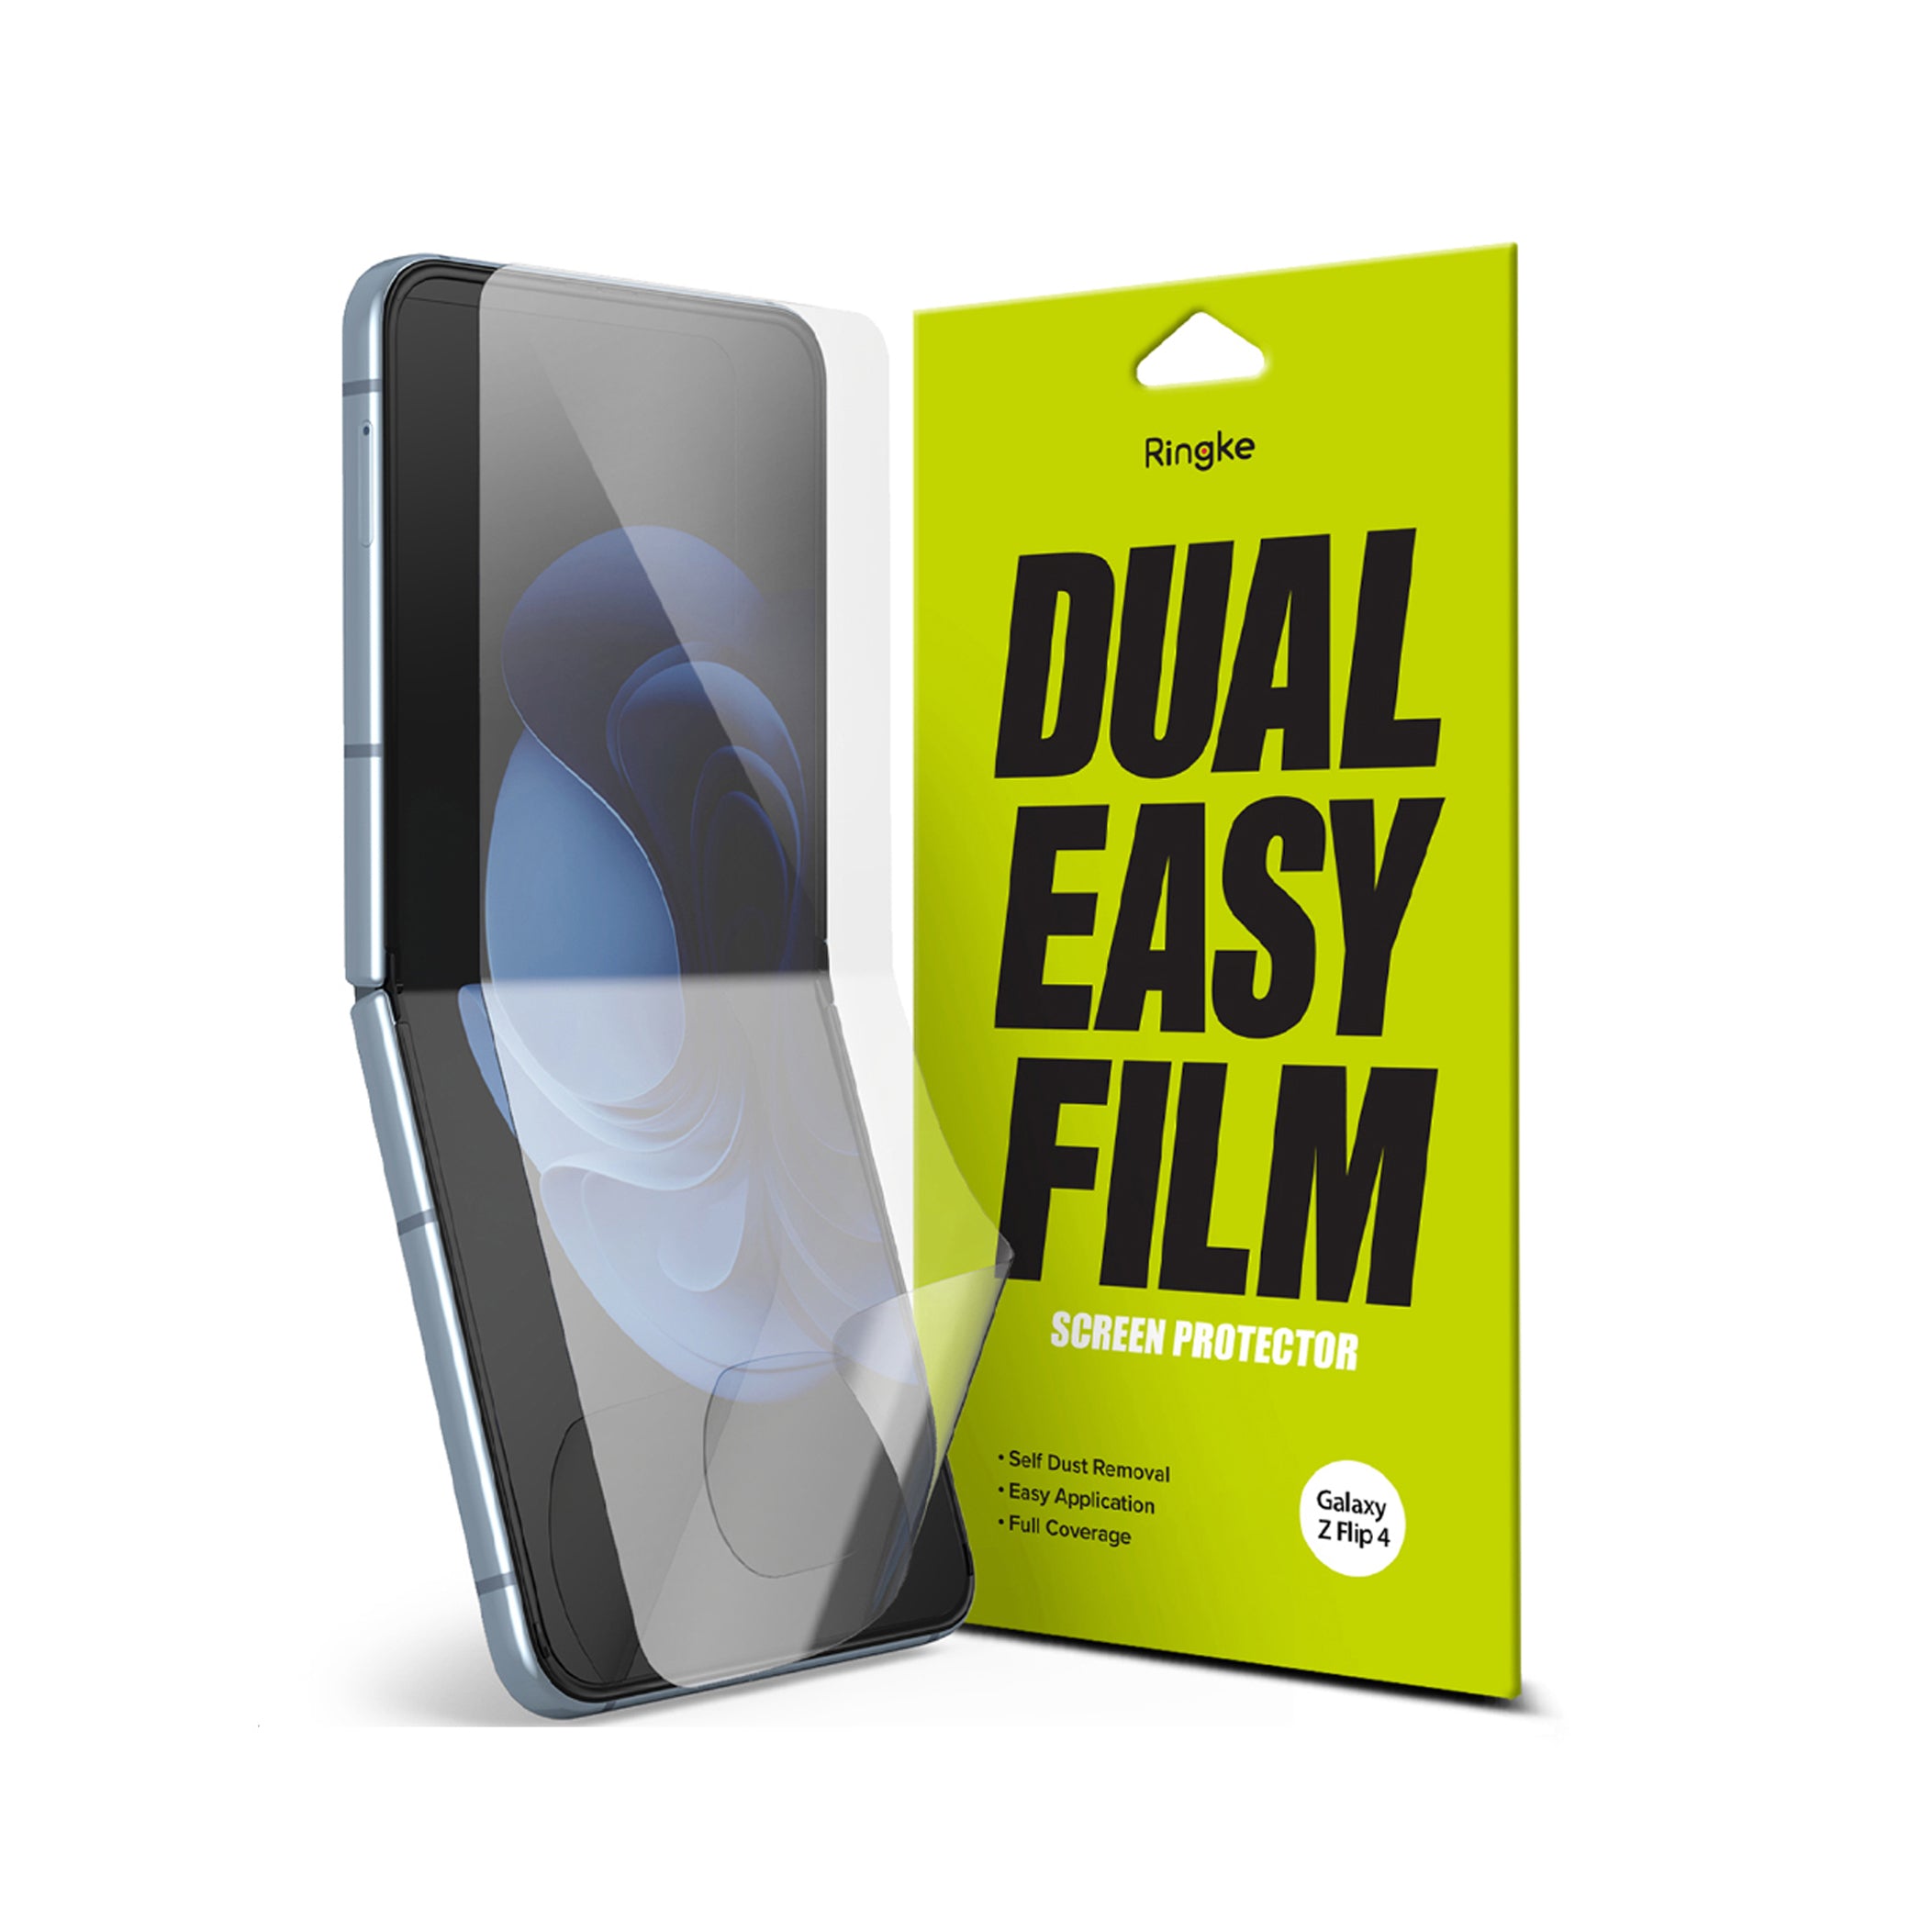 Ringke ﻿2pcs Dual Easy Screen Protector for Samsung Galaxy Z Flip 4 Screen Protectors Ringke CLEAR 